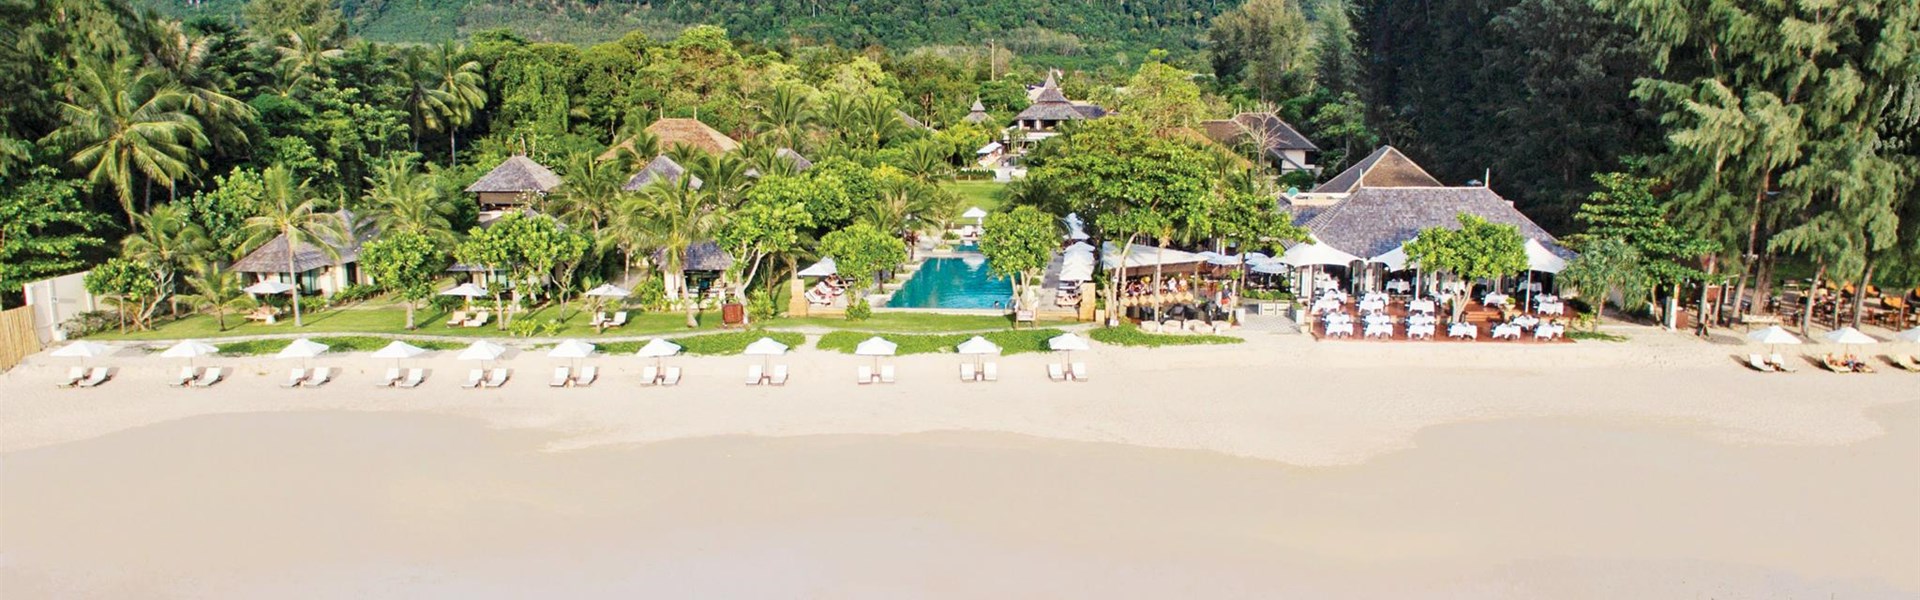 Marco Polo - Layana Resort and Spa Koh Lanta - ADULTS ONLY - 